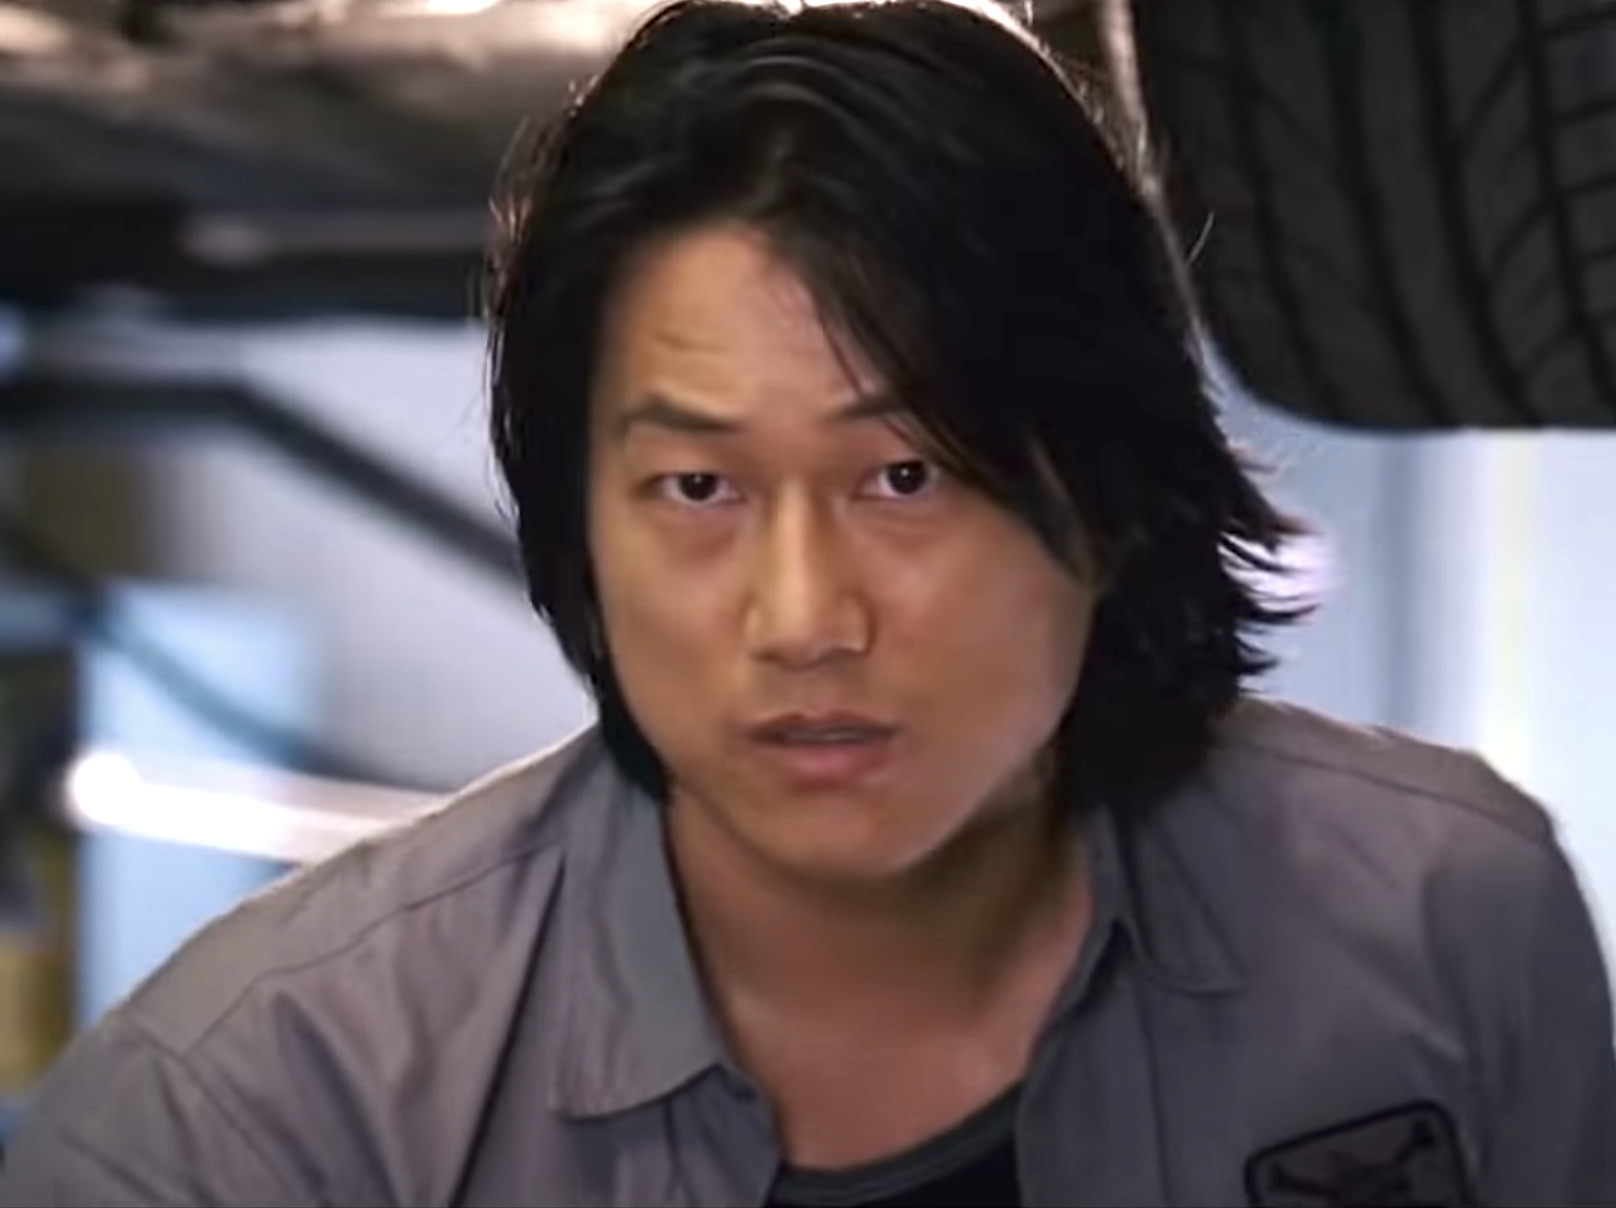 Sung Kang as Han in "The Fast and the Furious: Tokyo Drift."